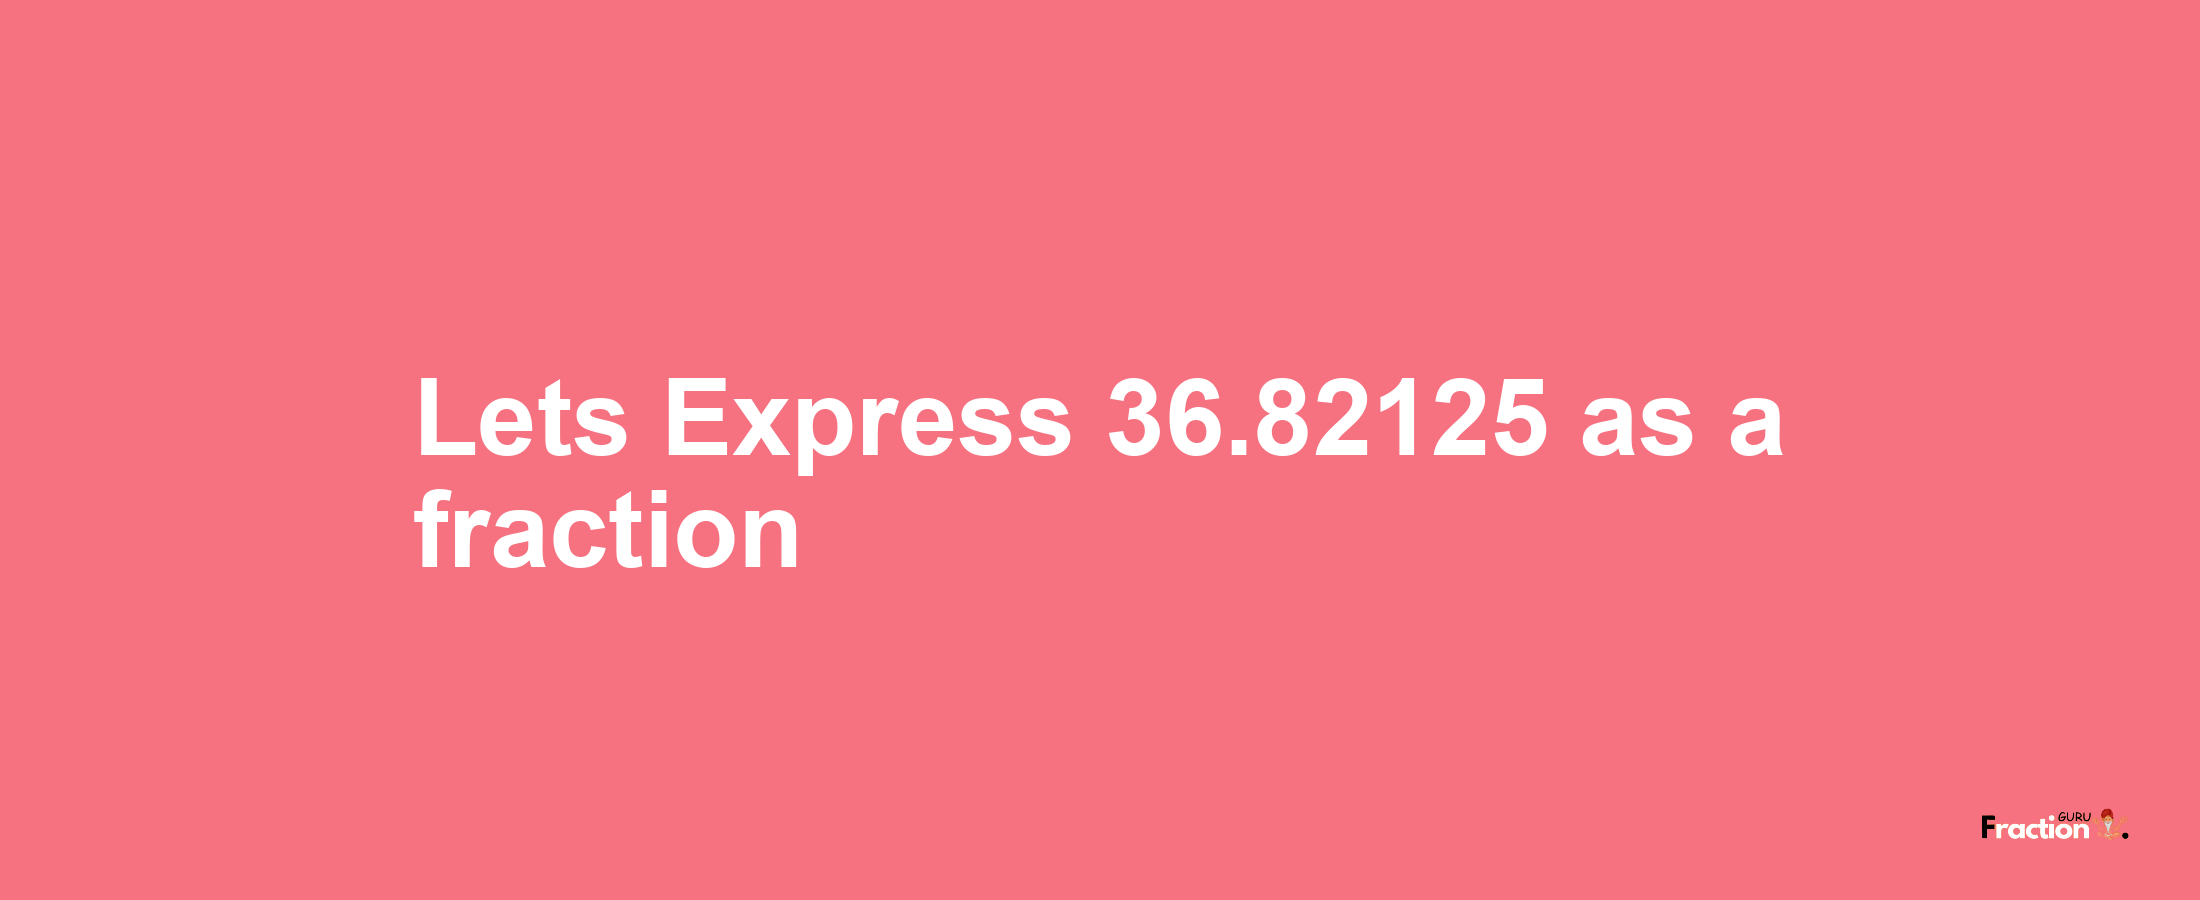 Lets Express 36.82125 as afraction